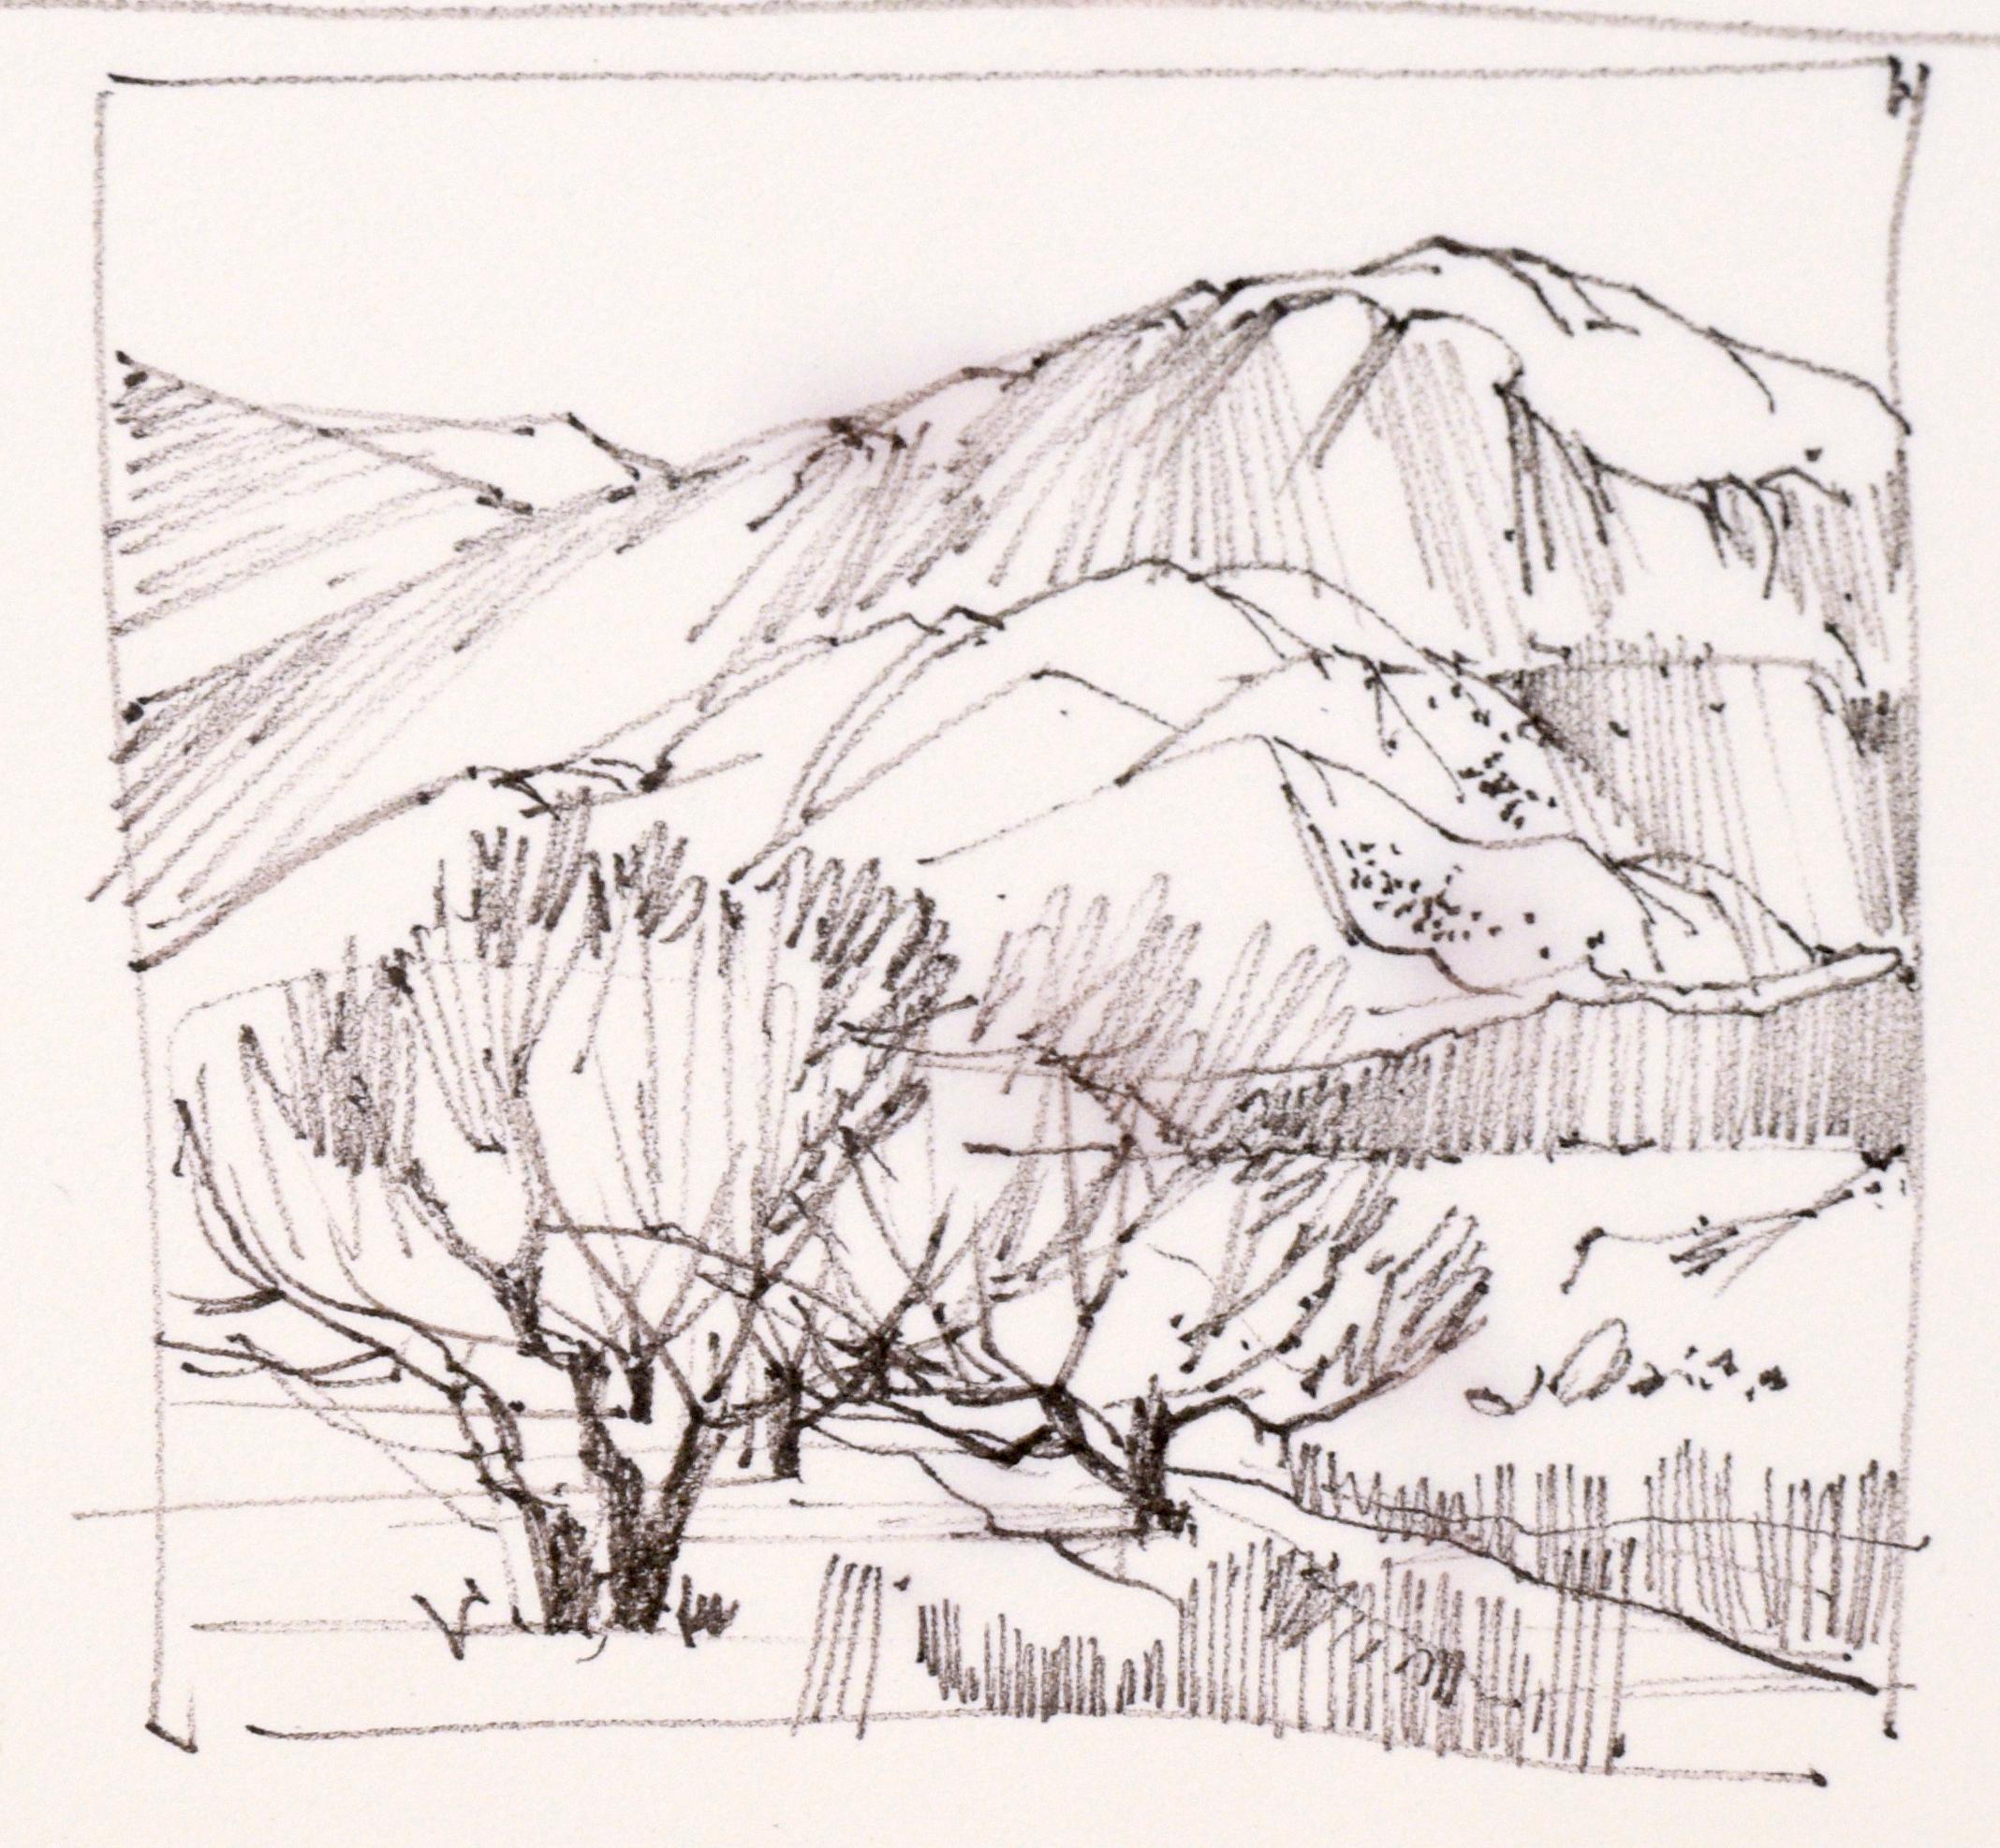 Four-Panel Thumbnail Sketches of Desert and Canyon Landscapes in Ink on Paper - American Impressionist Art by Laurence Sisson